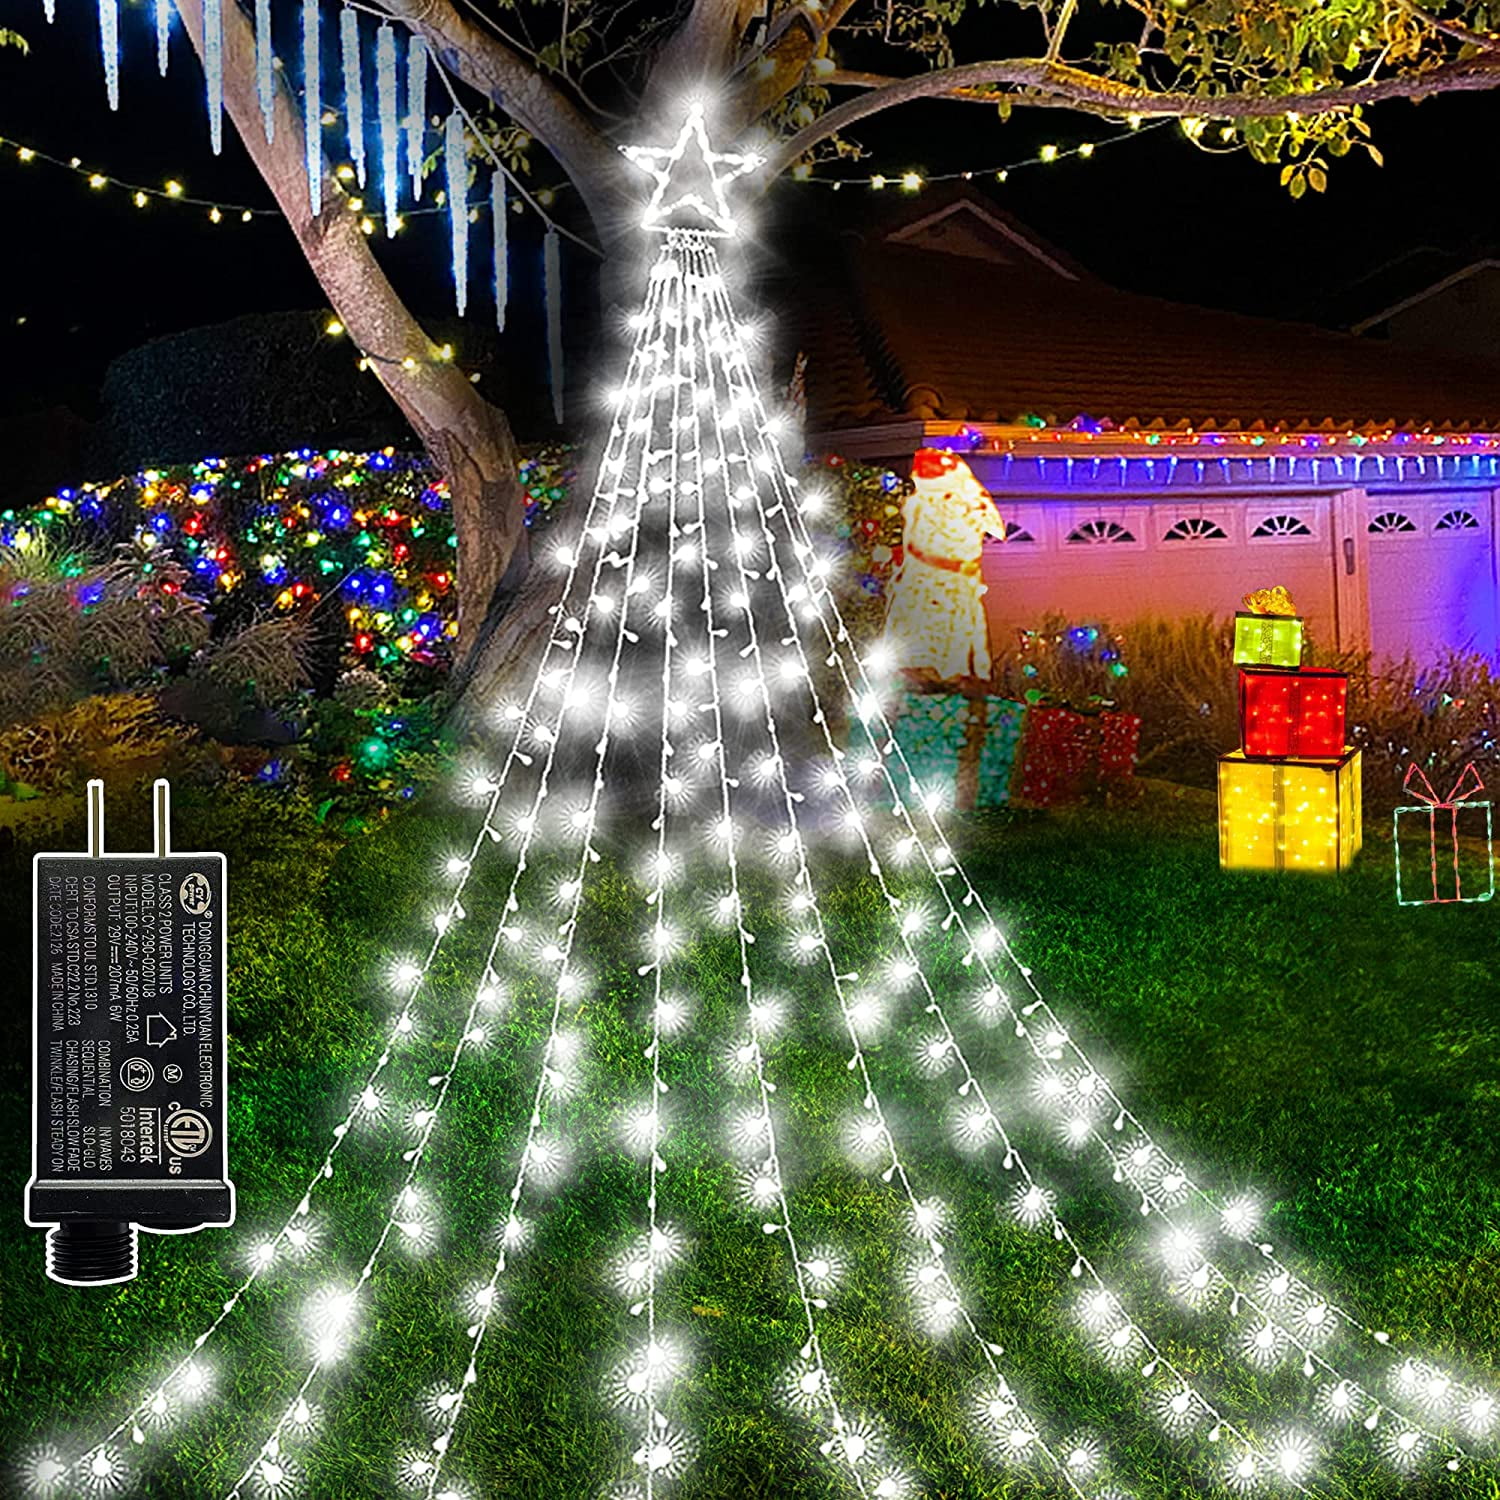  KISPATTI Christmas Decoration Lights 23FT 661 LED with  Star,Outdoor Christmas Tree Light Multi-Color Warm White Switch,11 Modes  Christmas Waterfall String Lights,Gifts for Yard Patio Holiday : Home &  Kitchen